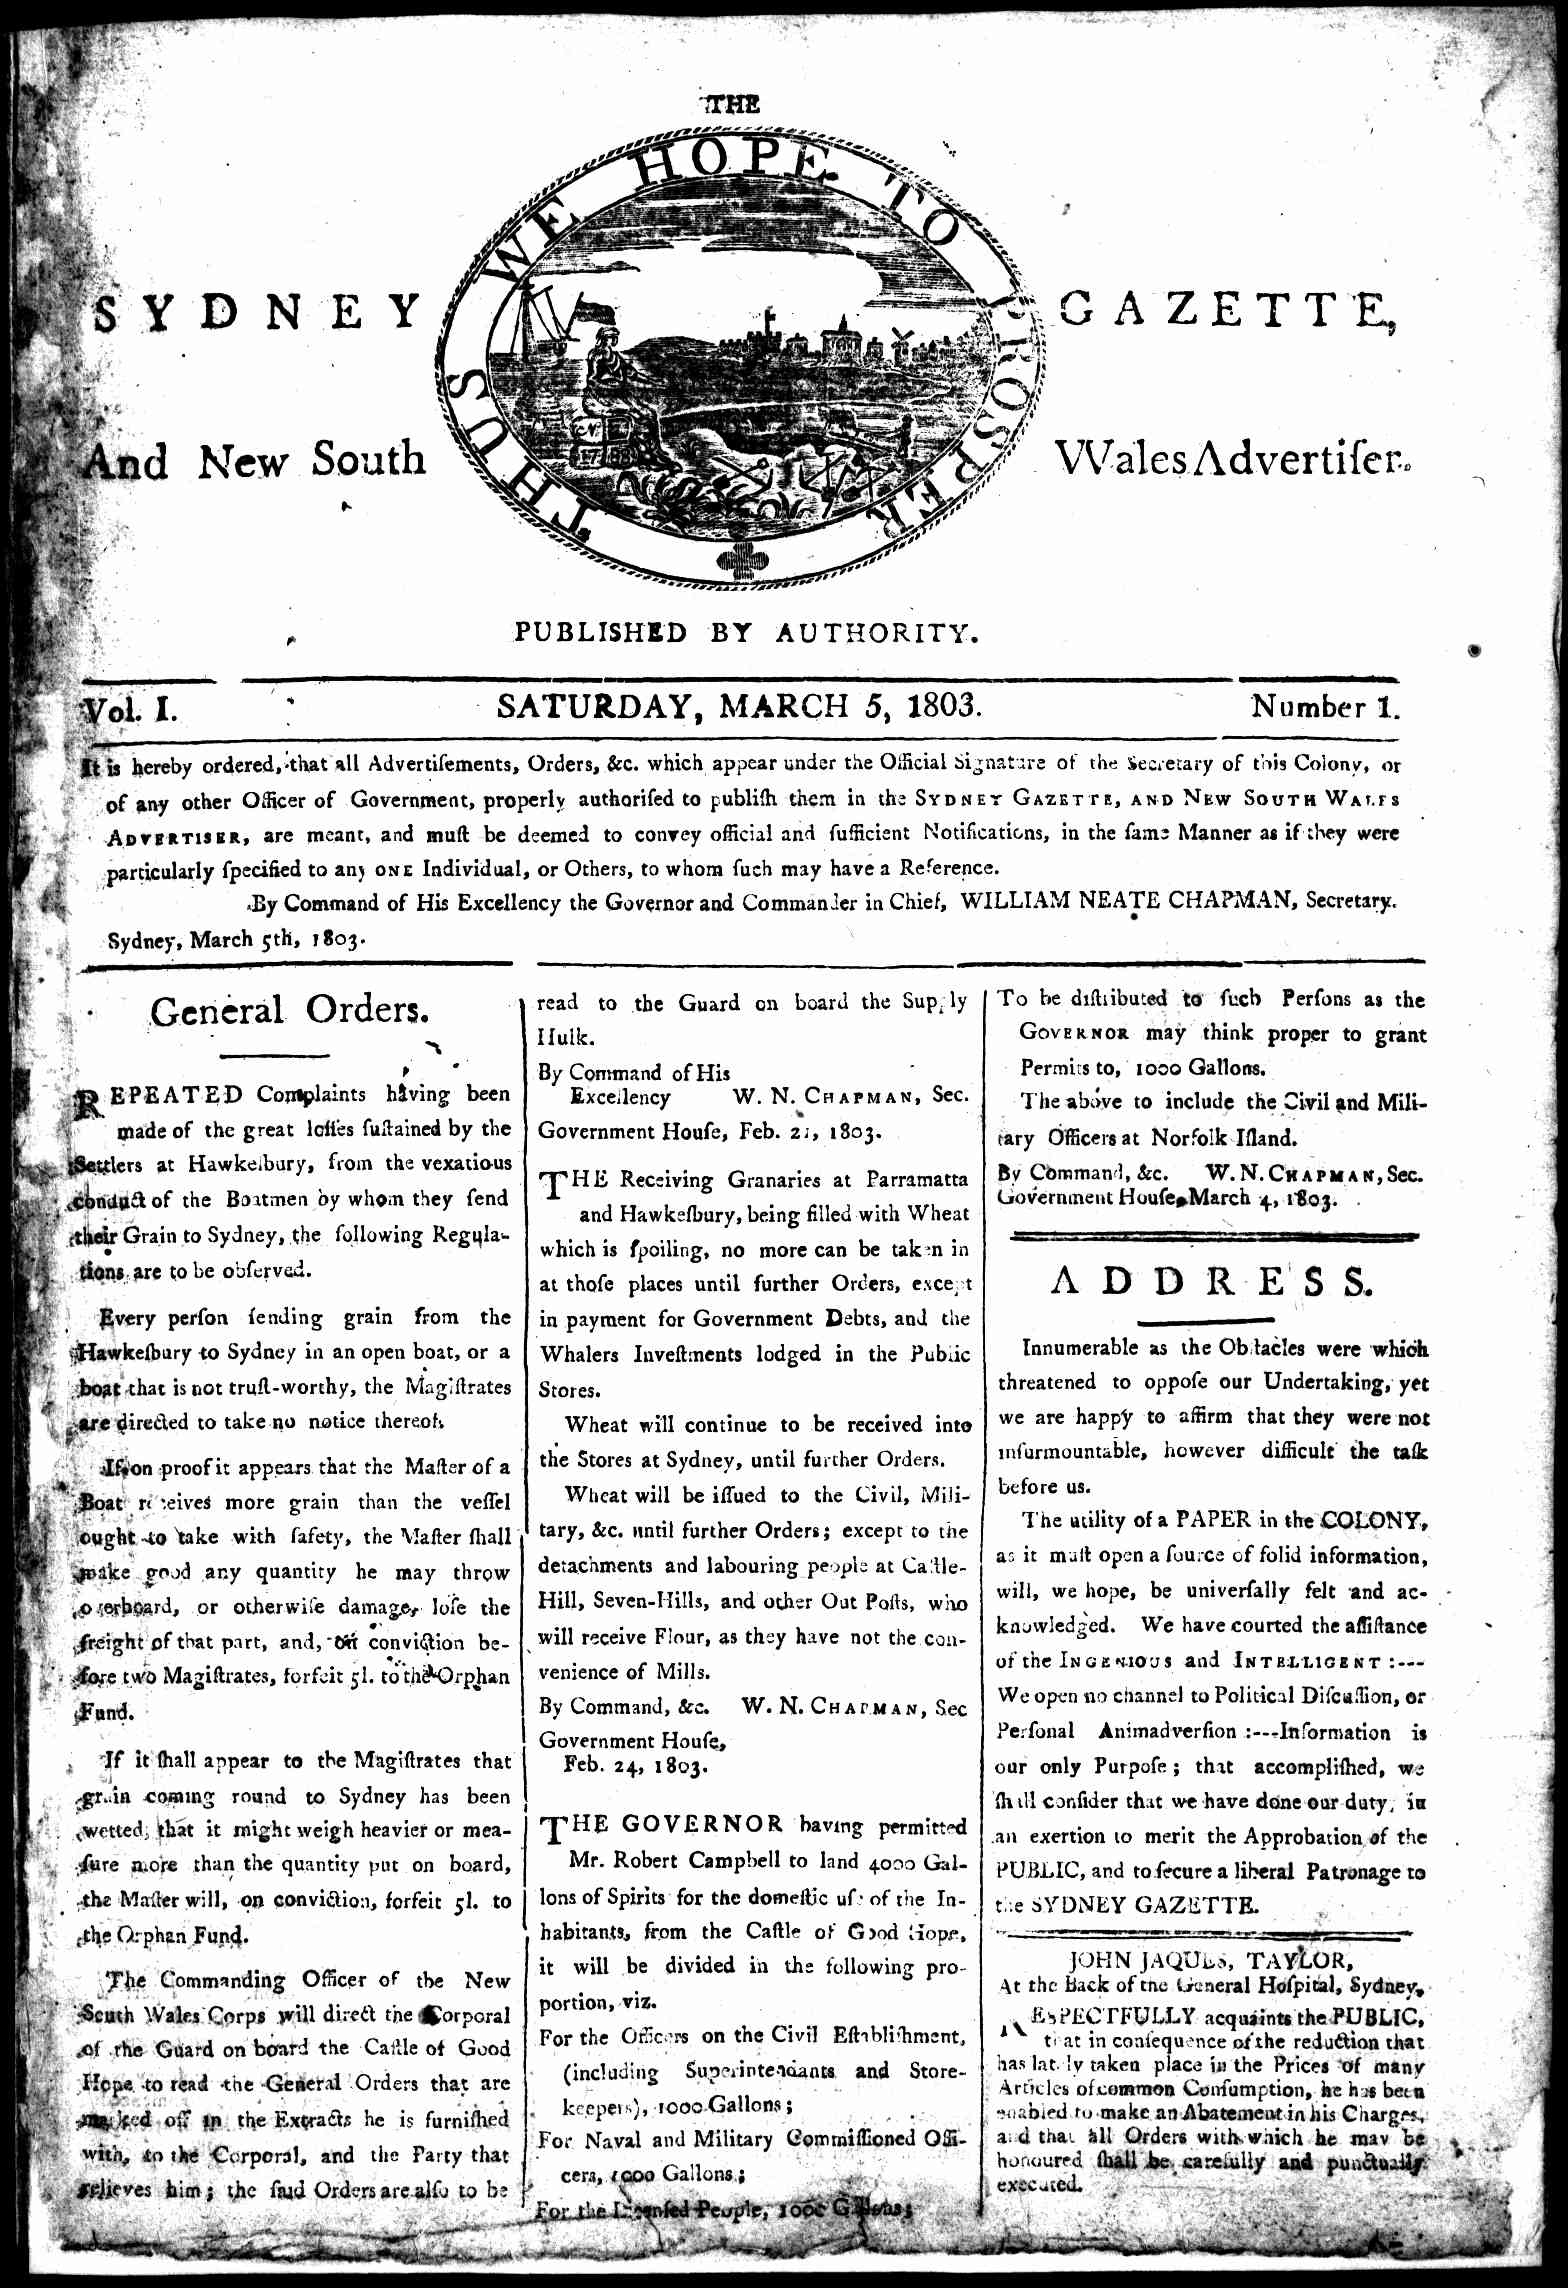 The Sydney gazette and New South Wales advertiser first issue 5 March 1803